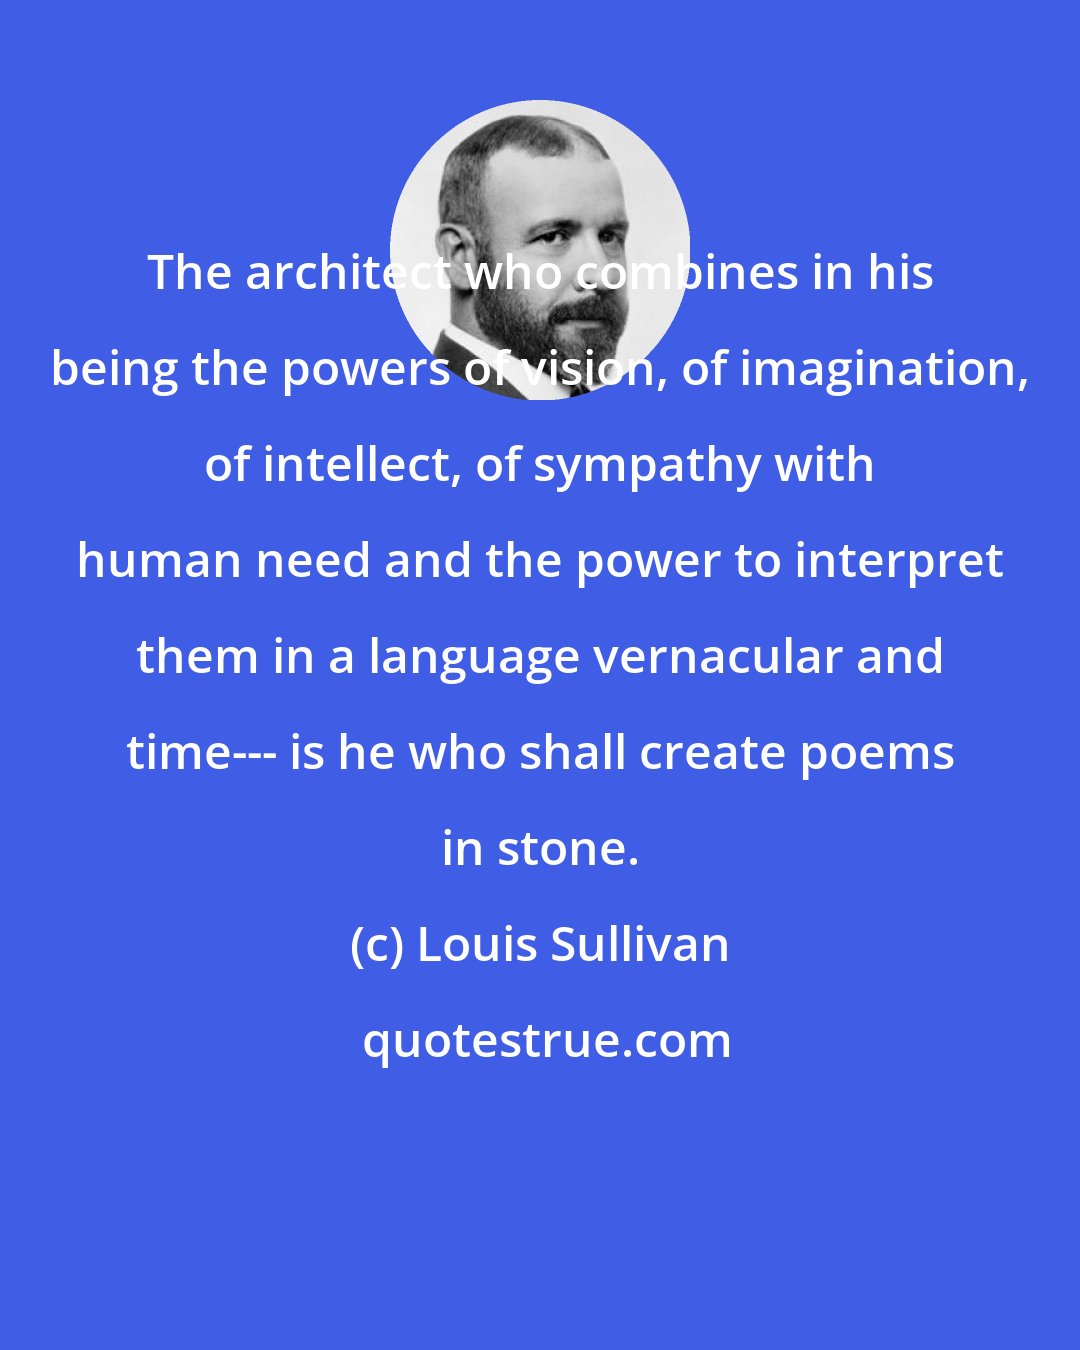 Louis Sullivan: The architect who combines in his being the powers of vision, of imagination, of intellect, of sympathy with human need and the power to interpret them in a language vernacular and time--- is he who shall create poems in stone.